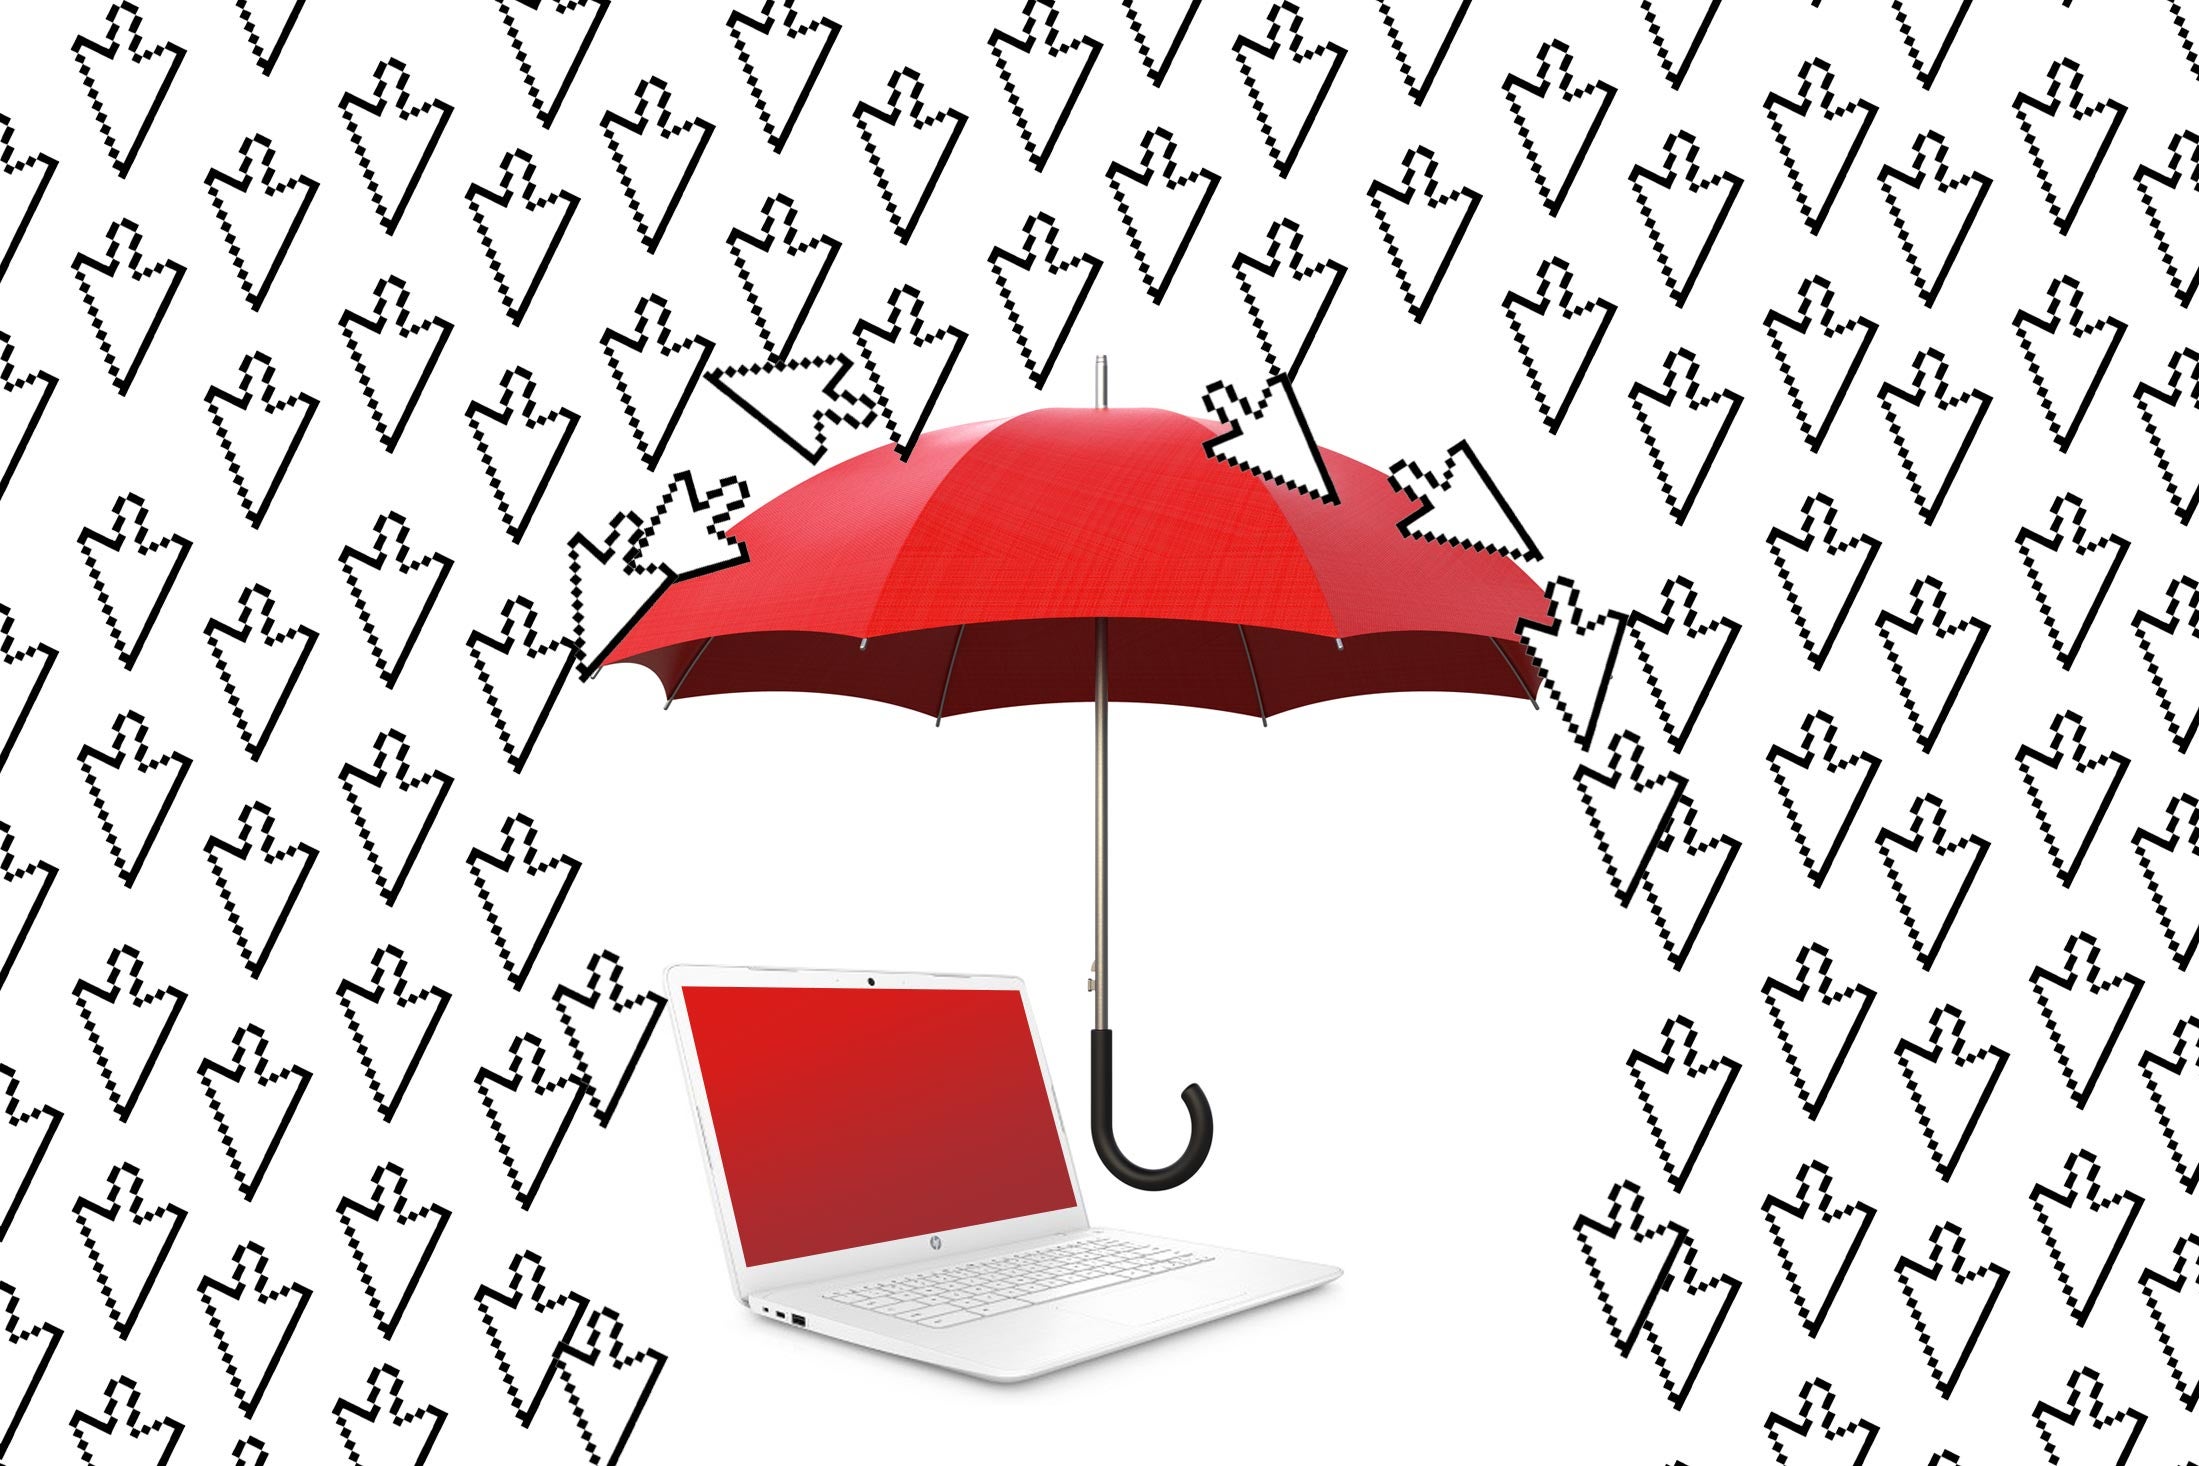 An umbrella hovering over a laptop, shielding it from a shower of cursor arrows raining down.